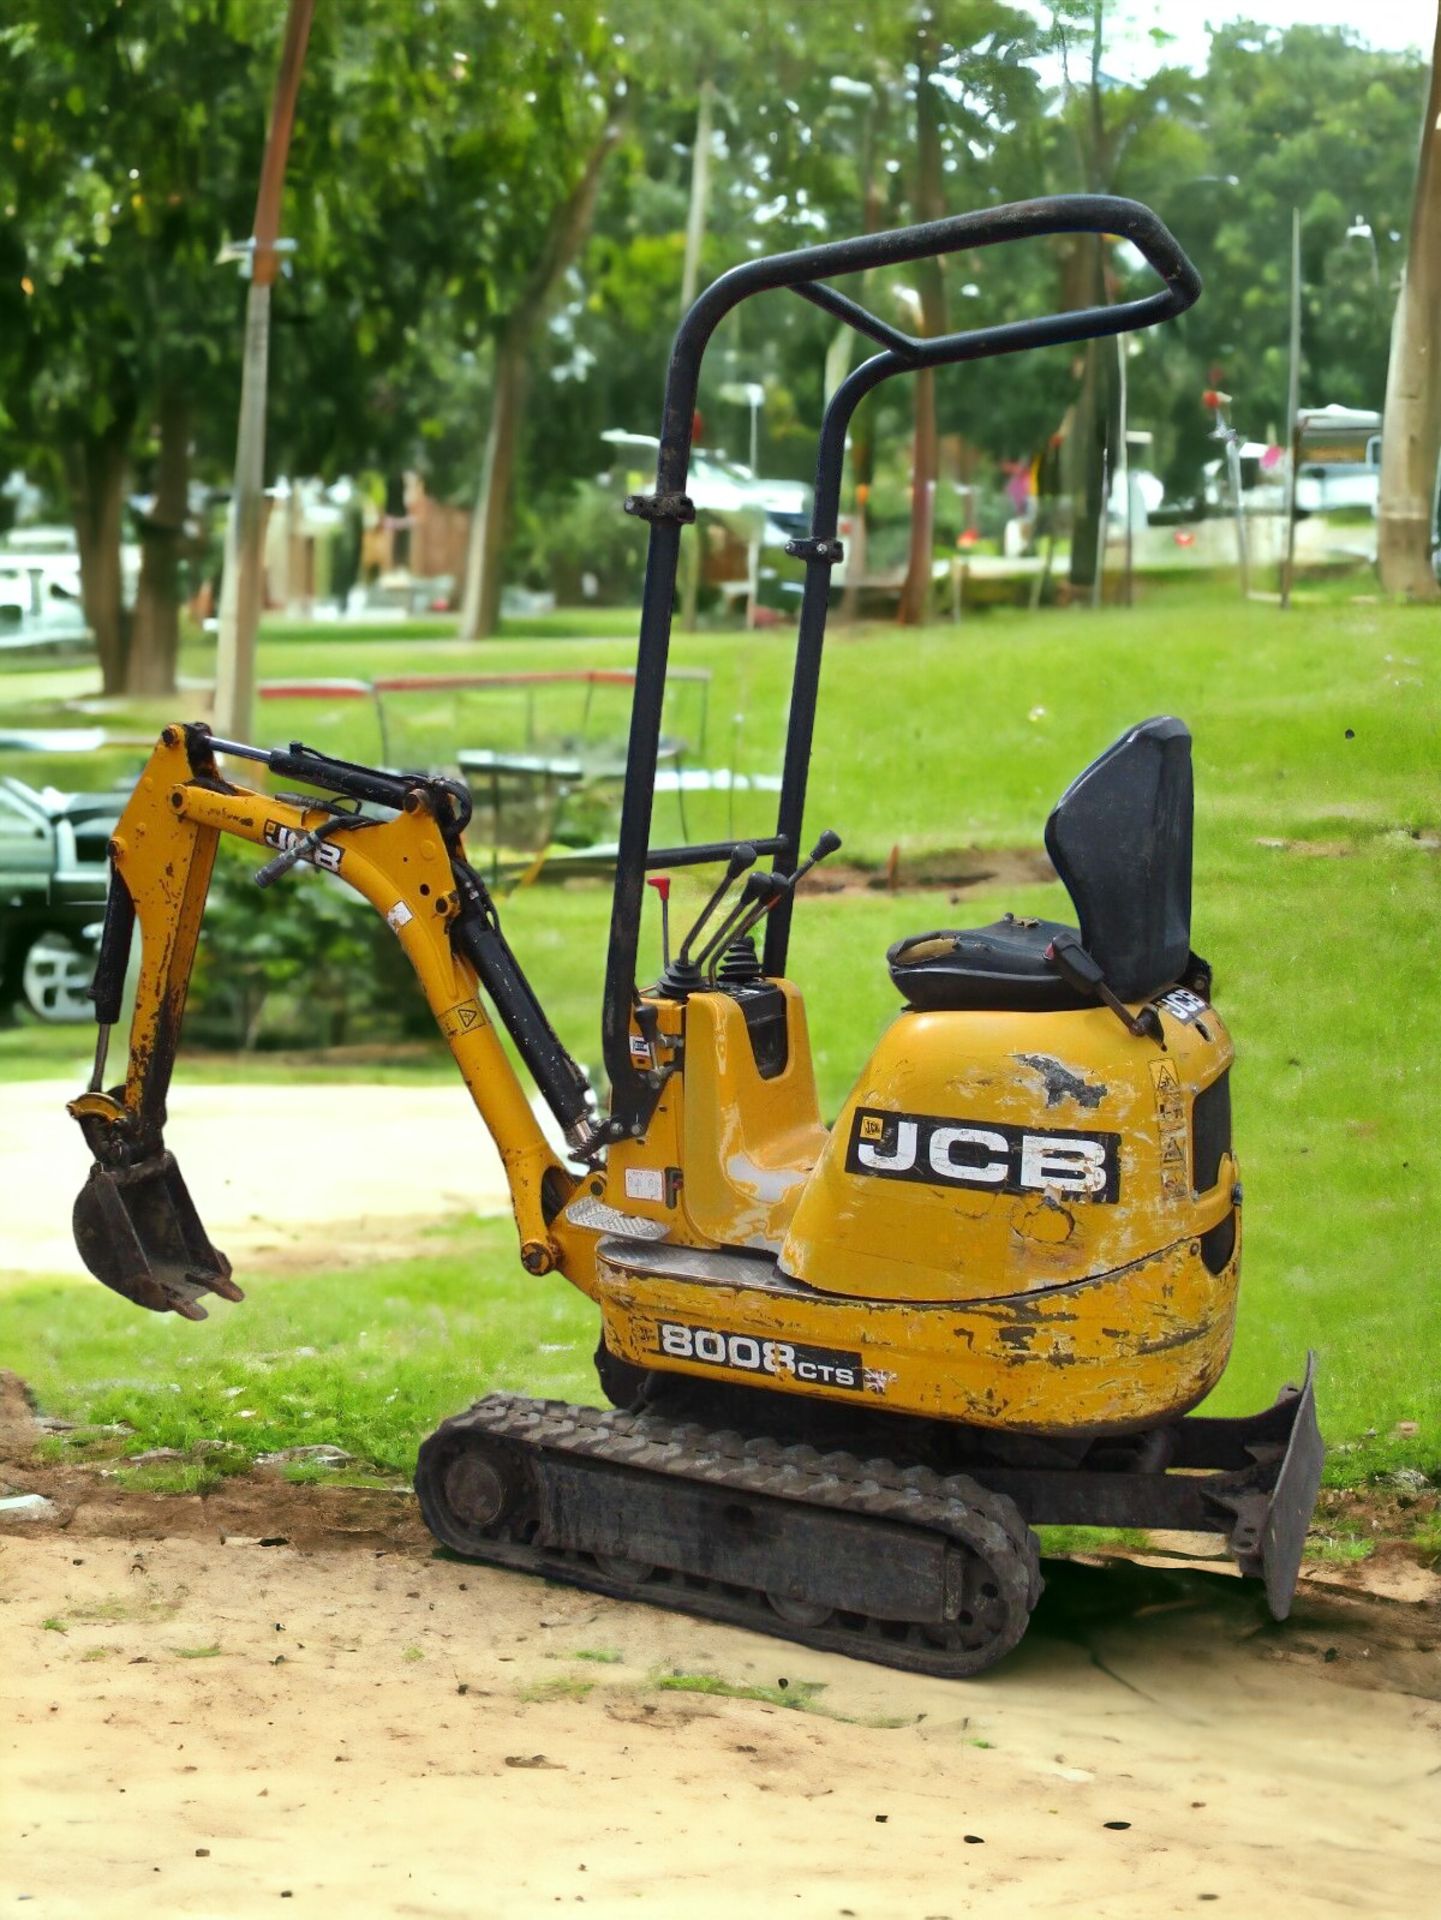 UNLOCK PRECISION AND POWER WITH THE JCB 8008 EXCAVATOR - Image 7 of 11